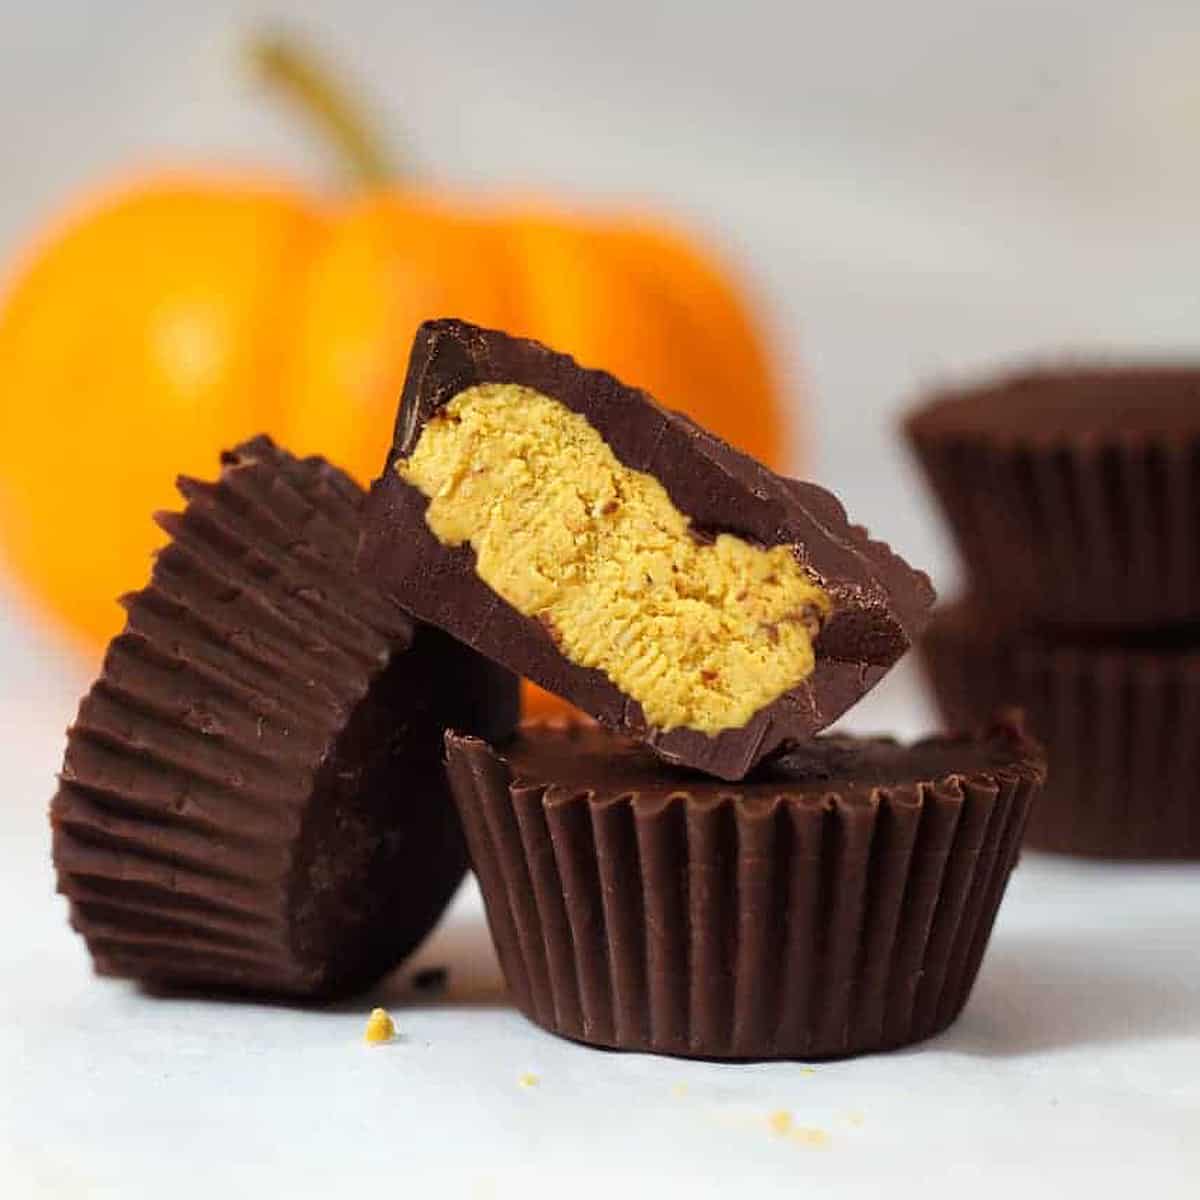 pumpkin fudge in a chocolate cup, leaning on another